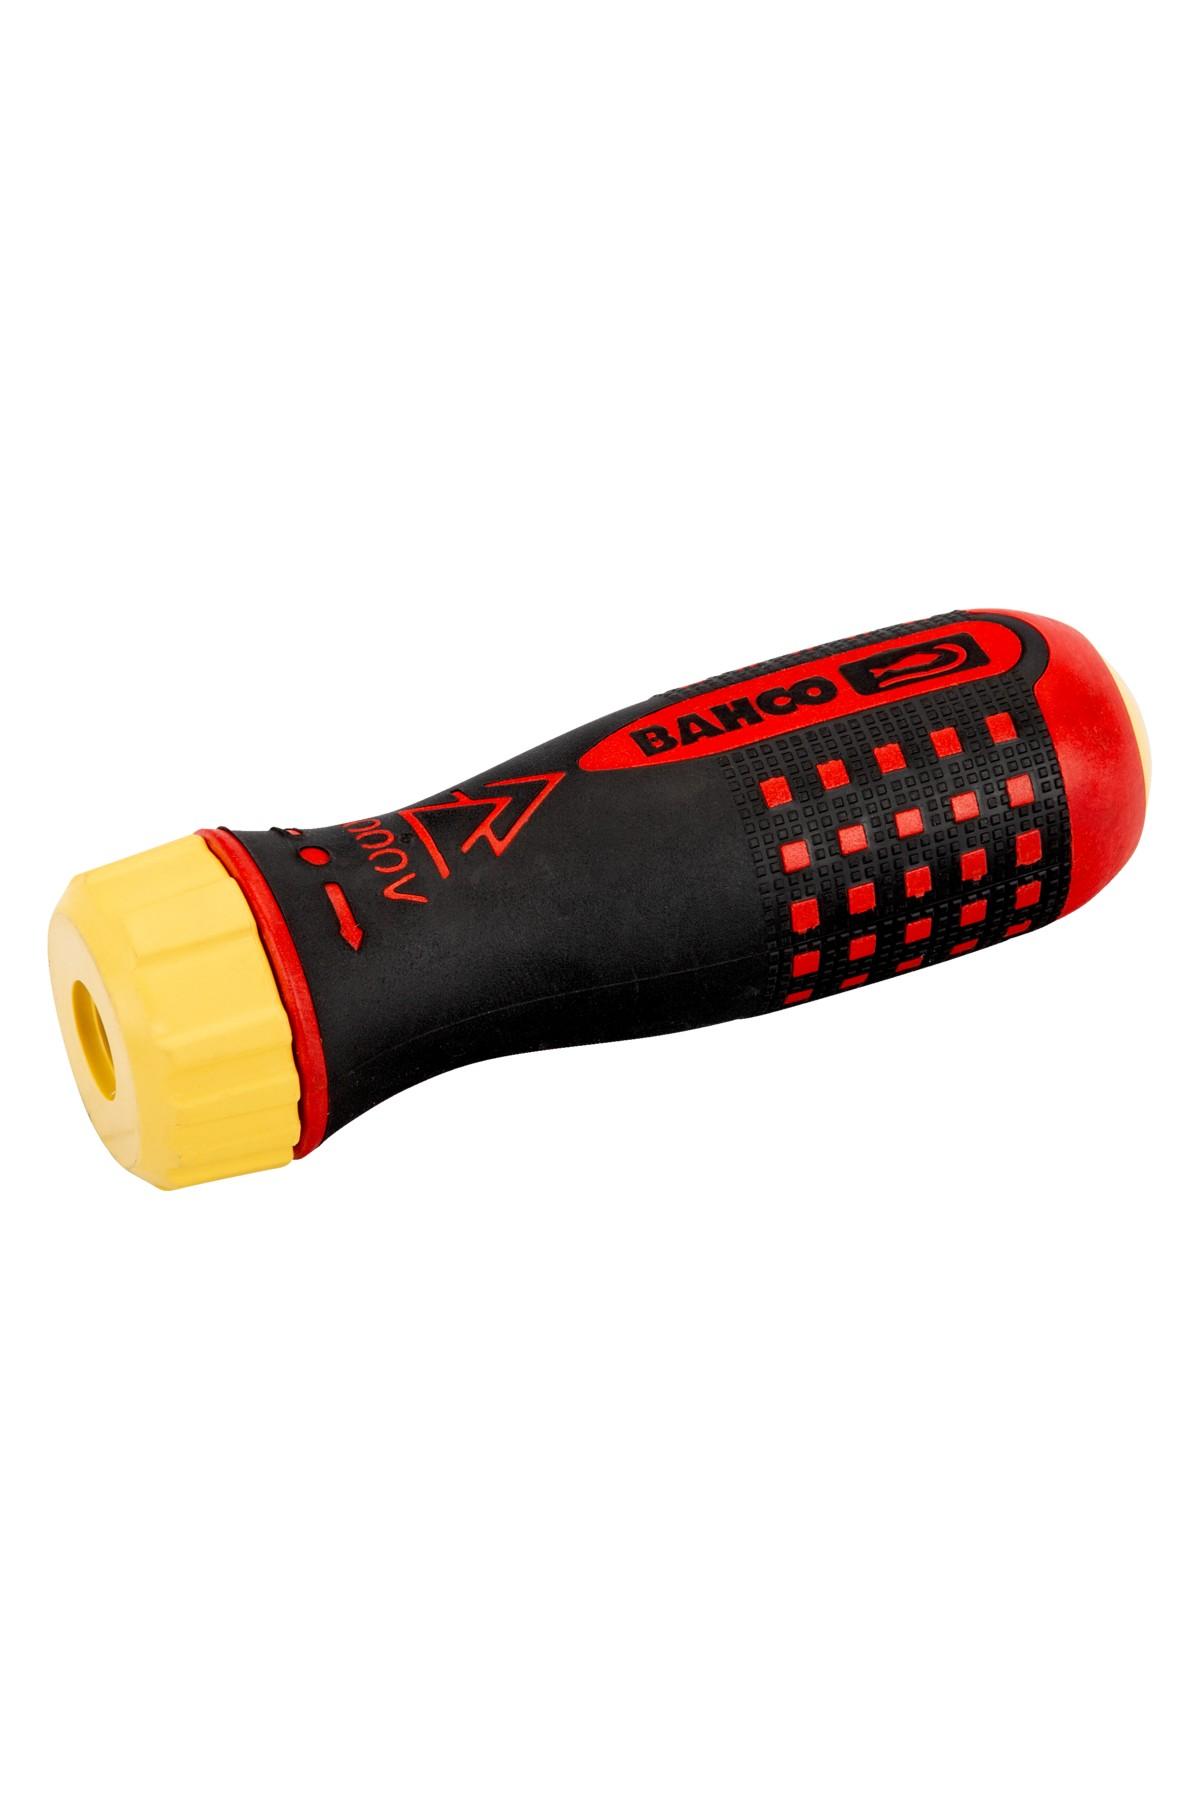 Insulated ratchet screwdriver with two-component handle